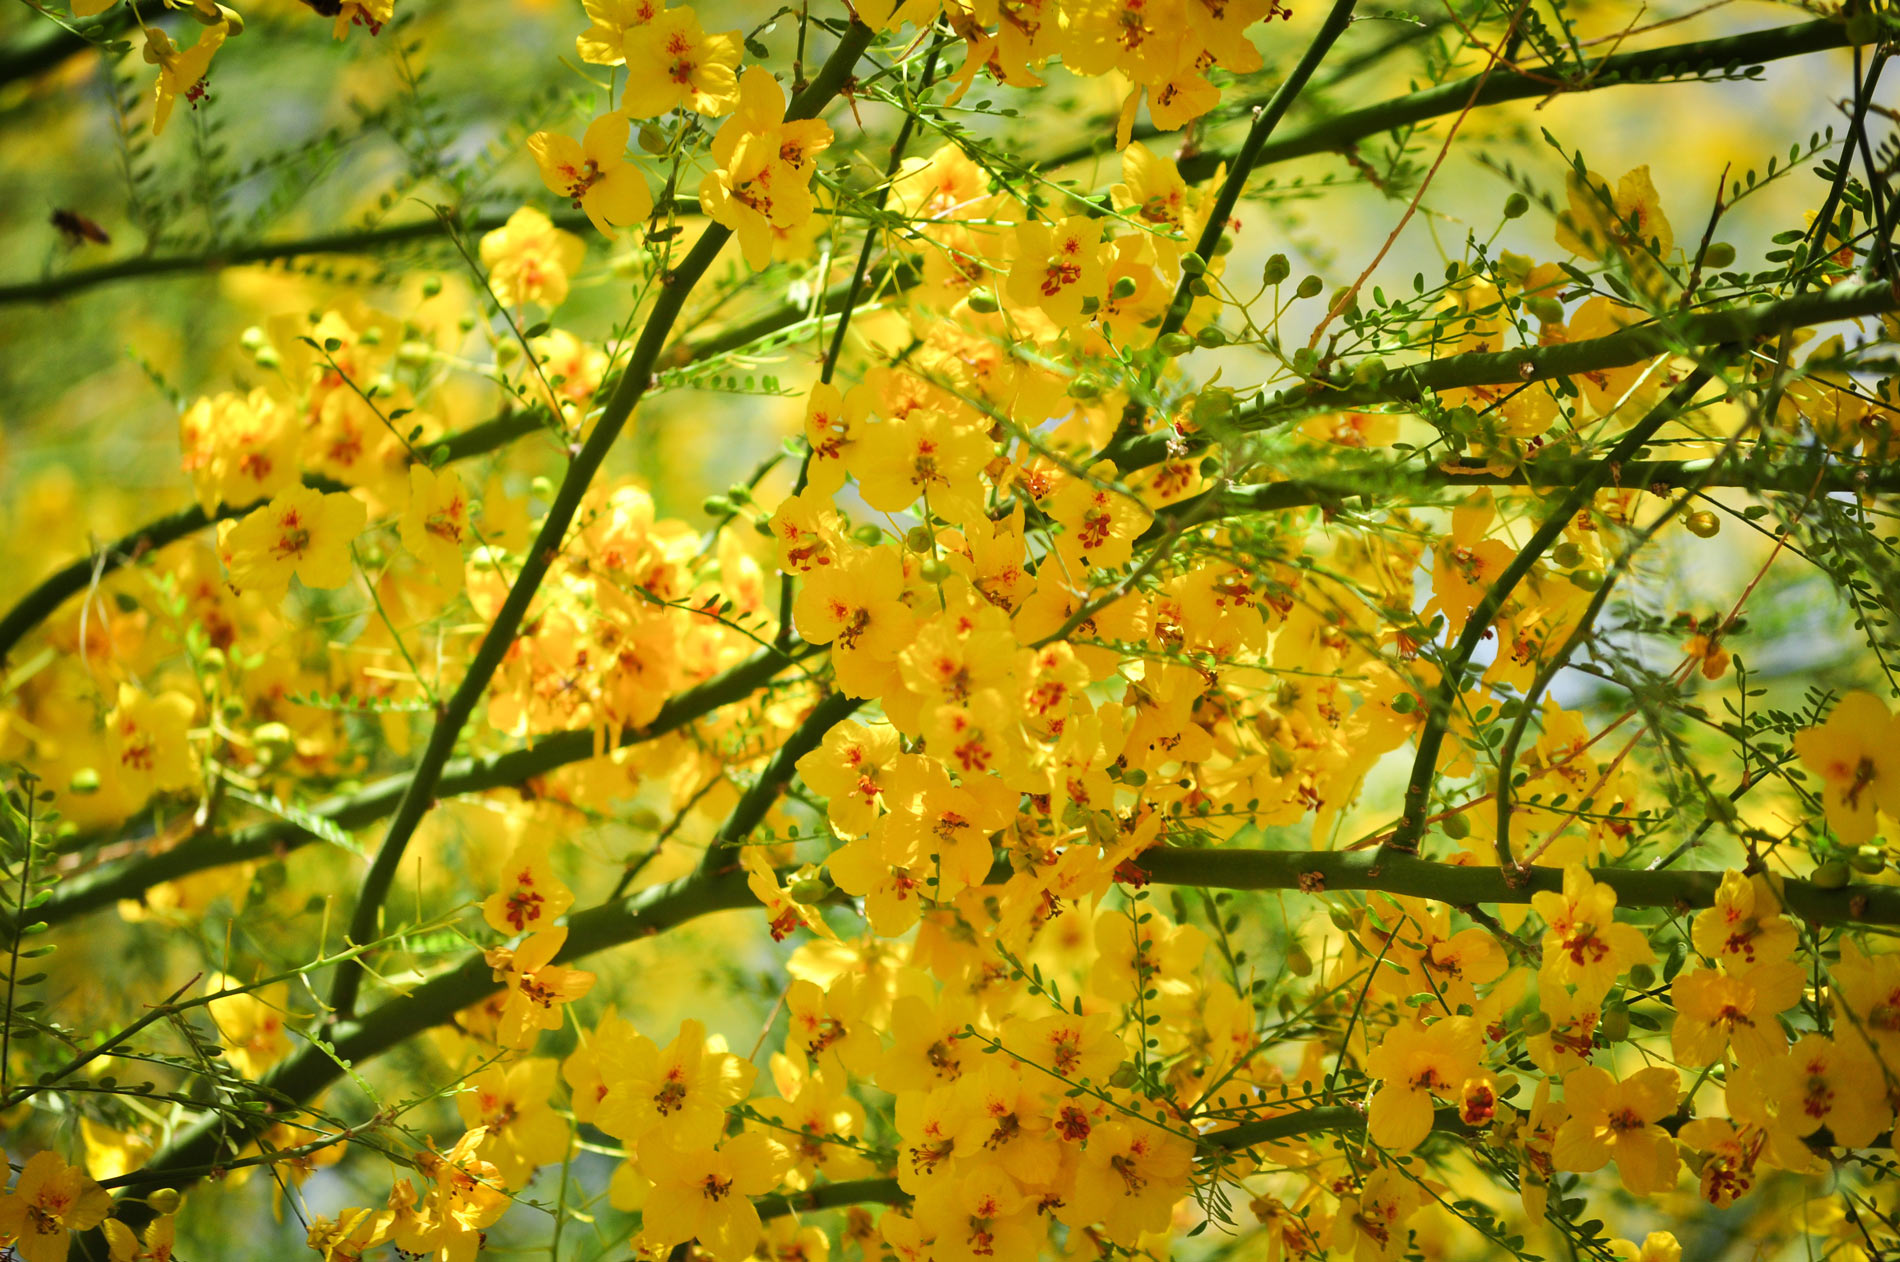 A close-up of the bright yellow blossoms of the Palo Verde tree.